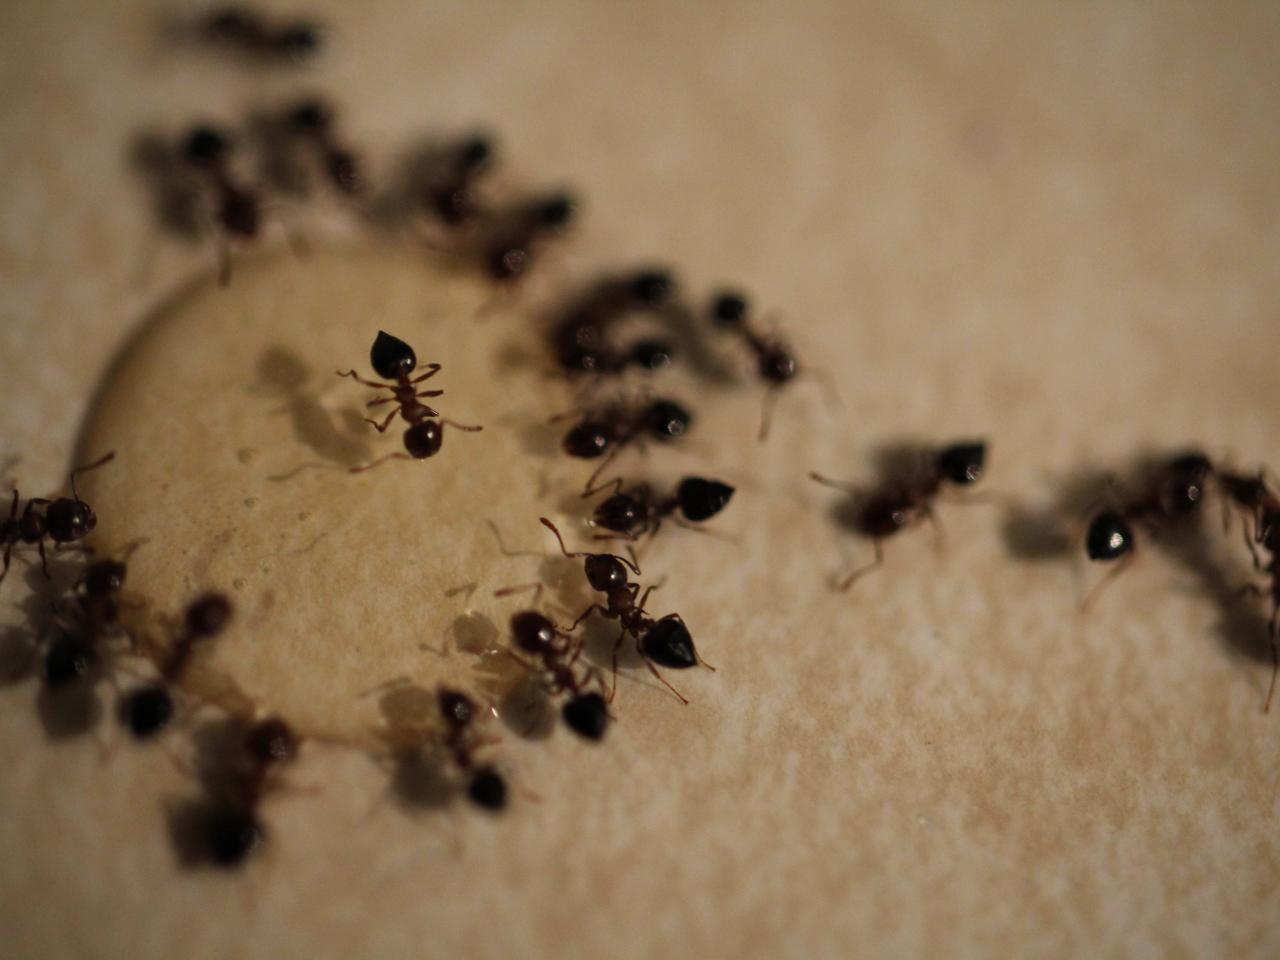 How To Get Rid Of Ants In The House And In Your Yard Hgtv,How To Get Rid Of Ants In House Naturally